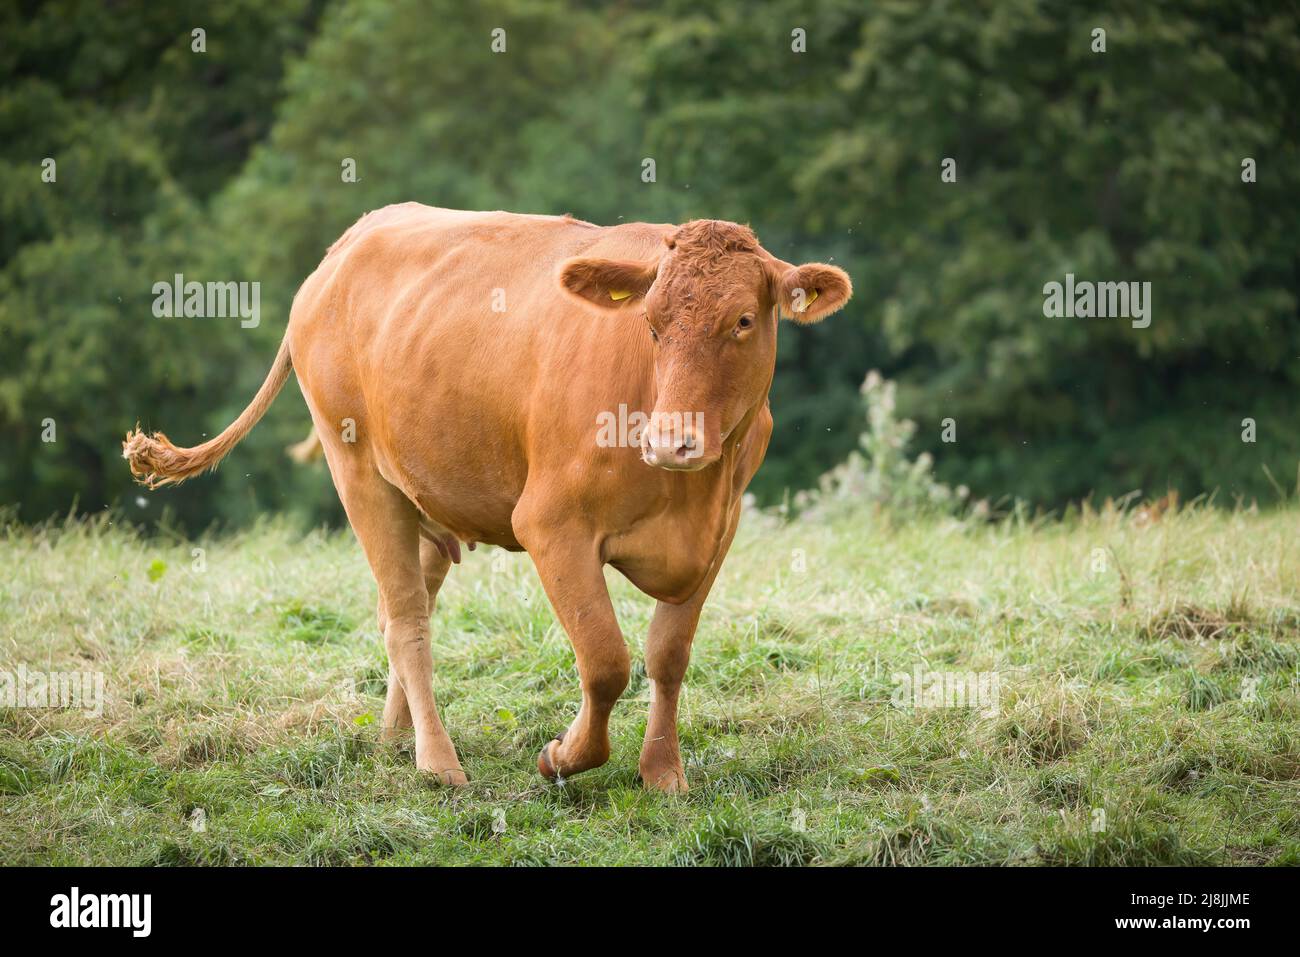 Hereford cow (beef cattle) in a field or pasture on farmland, Buckinghamshire, UK Stock Photo